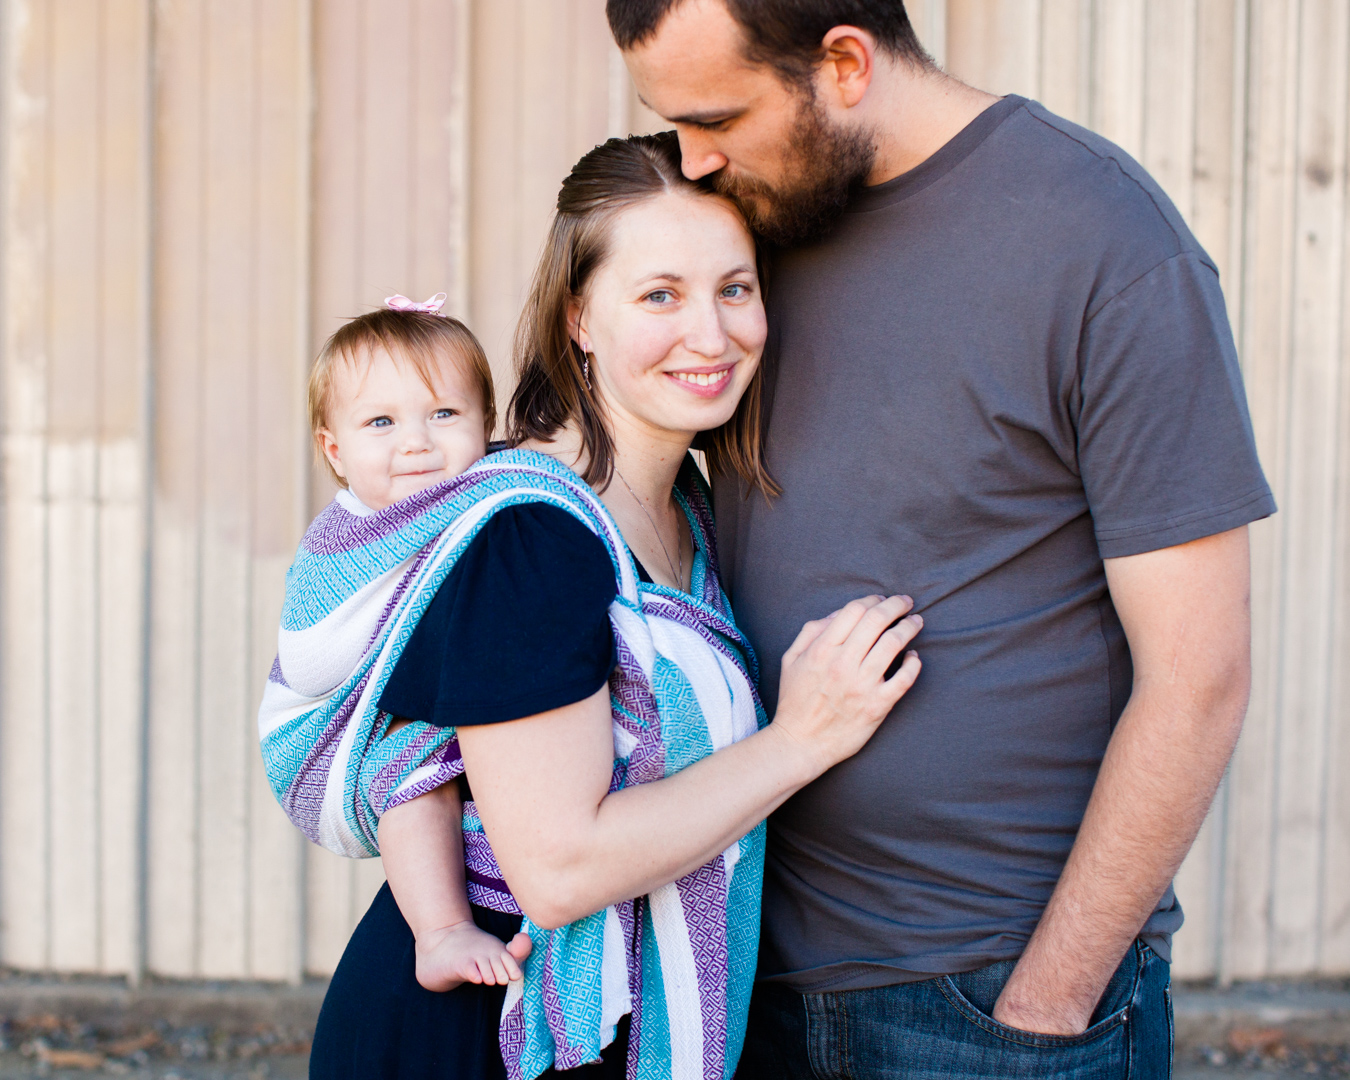 photograph-smiling-young-woman-wearing-colorful-baby-carrier-tall-man-kissing-her-forehead